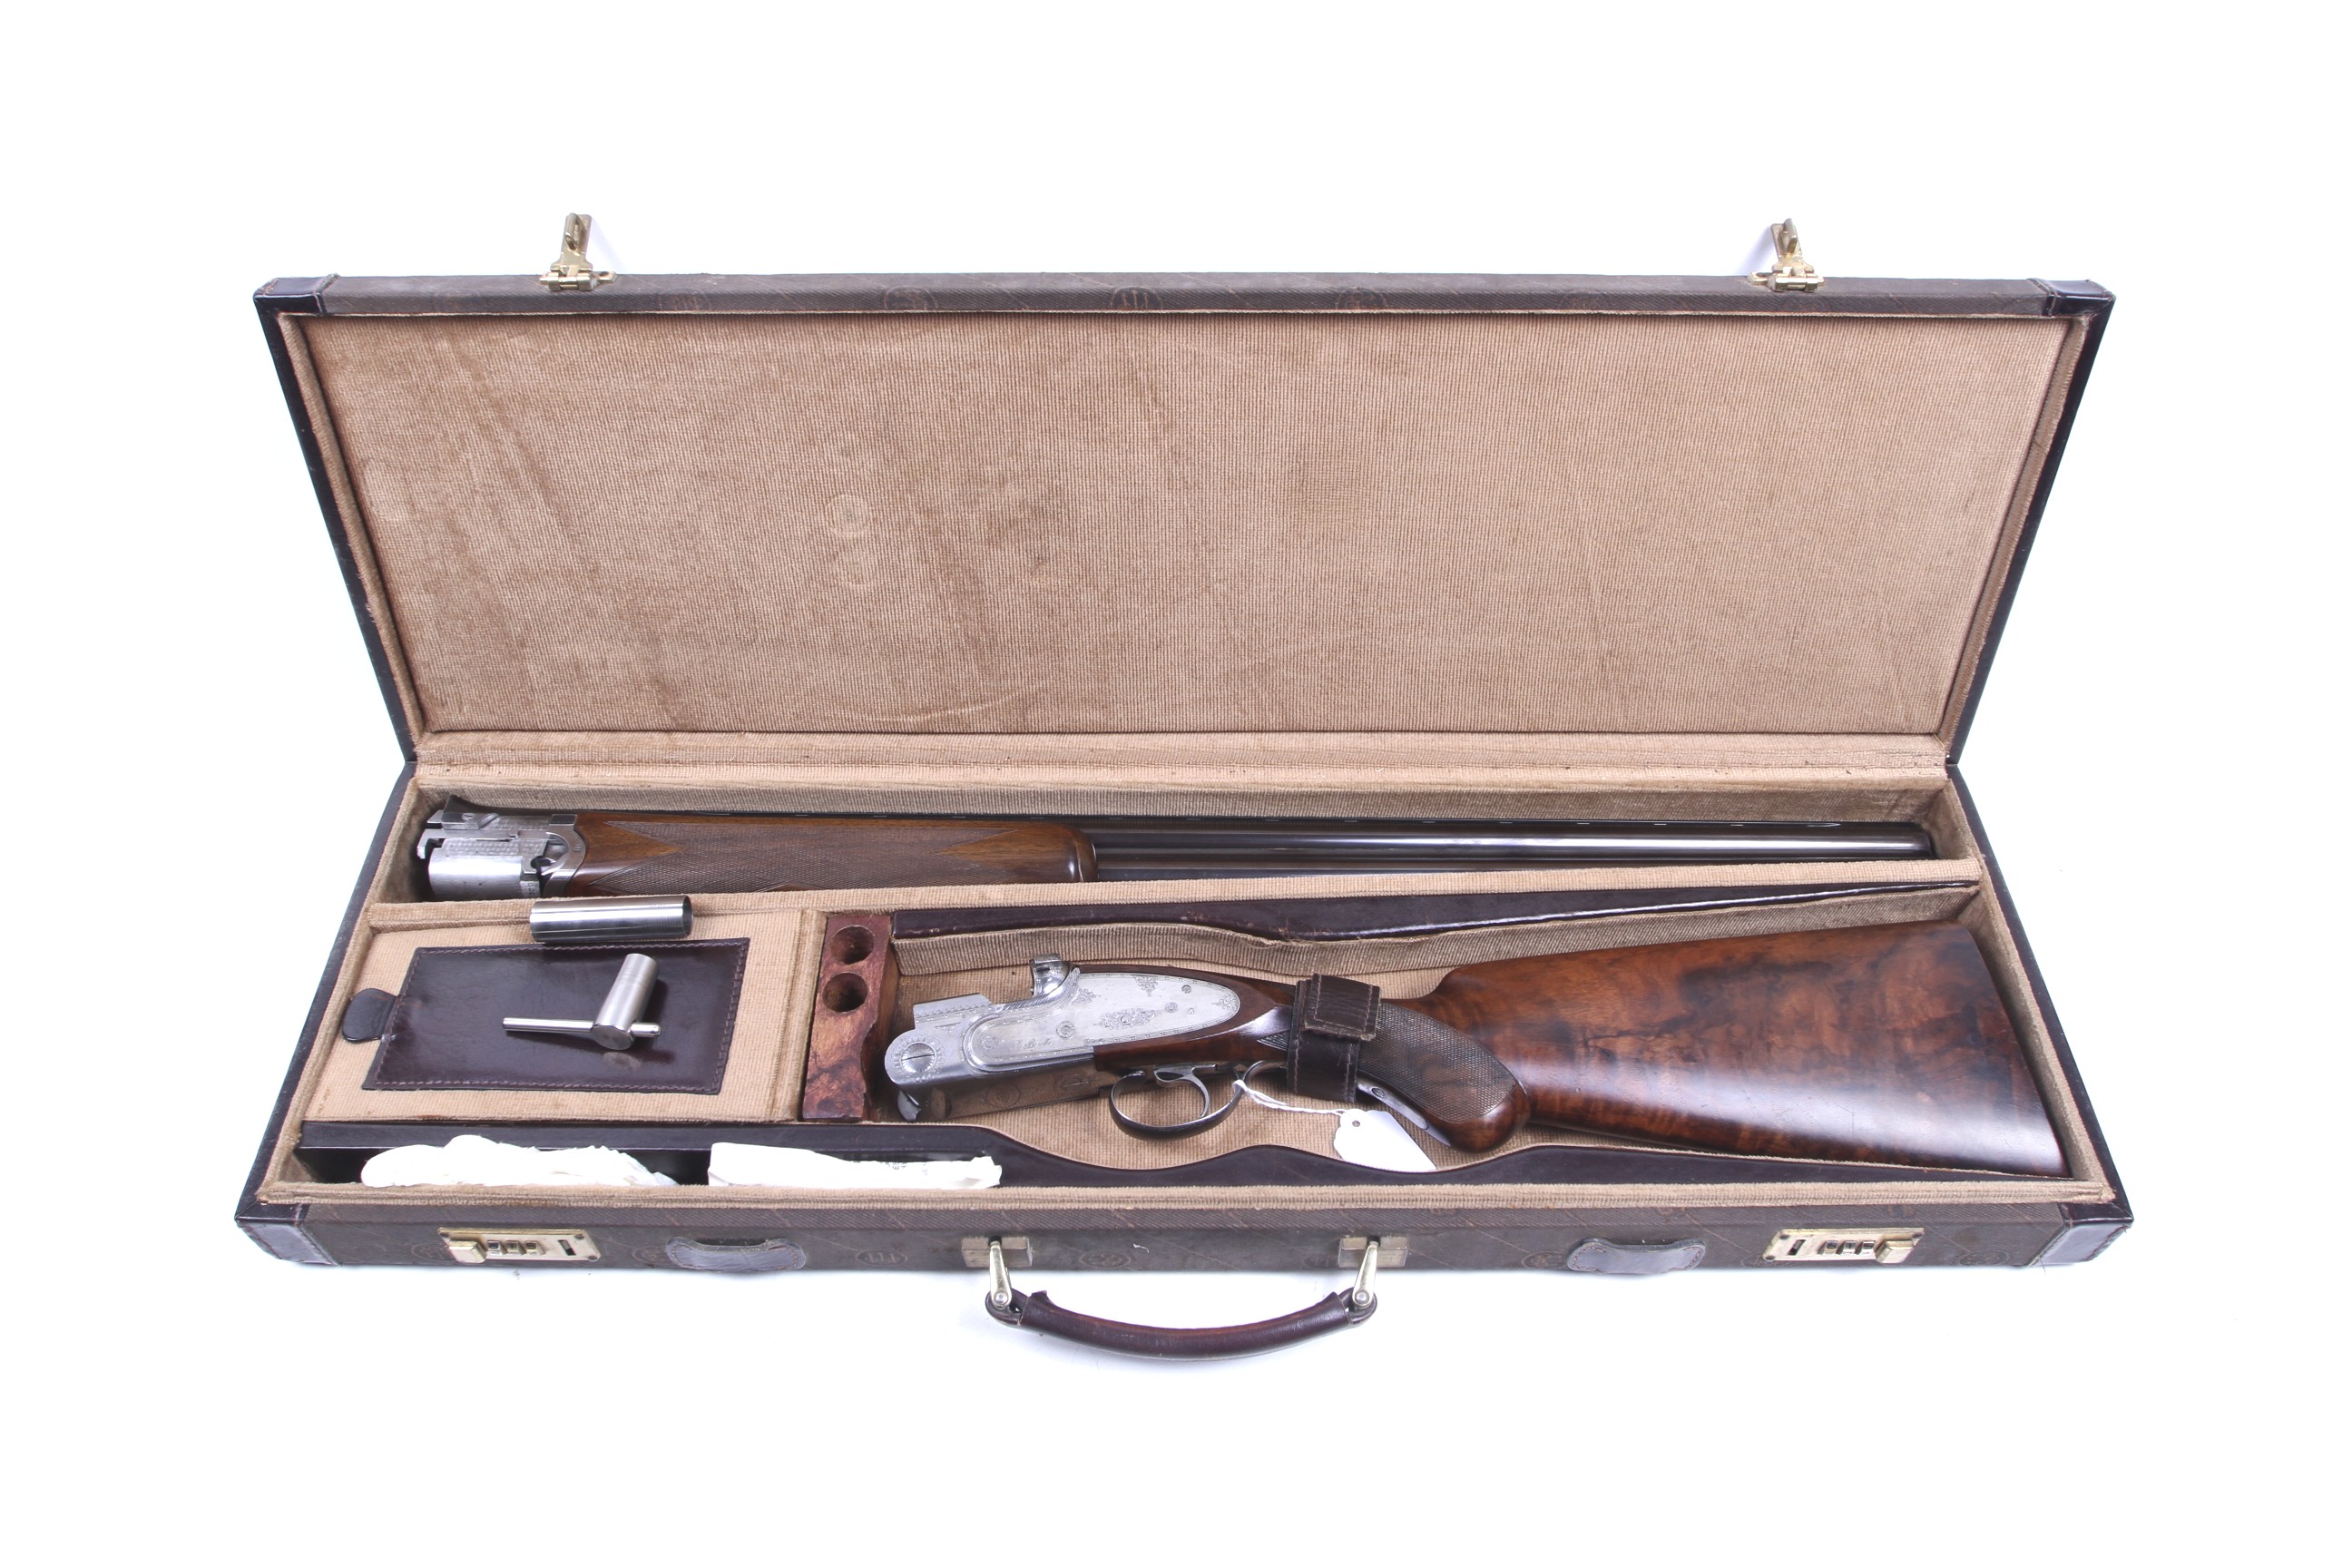 A Beretta S04 double-barrelled over and under 12 gauge shotgun. S/N A04150B, sidelock ejectors, - Image 5 of 14